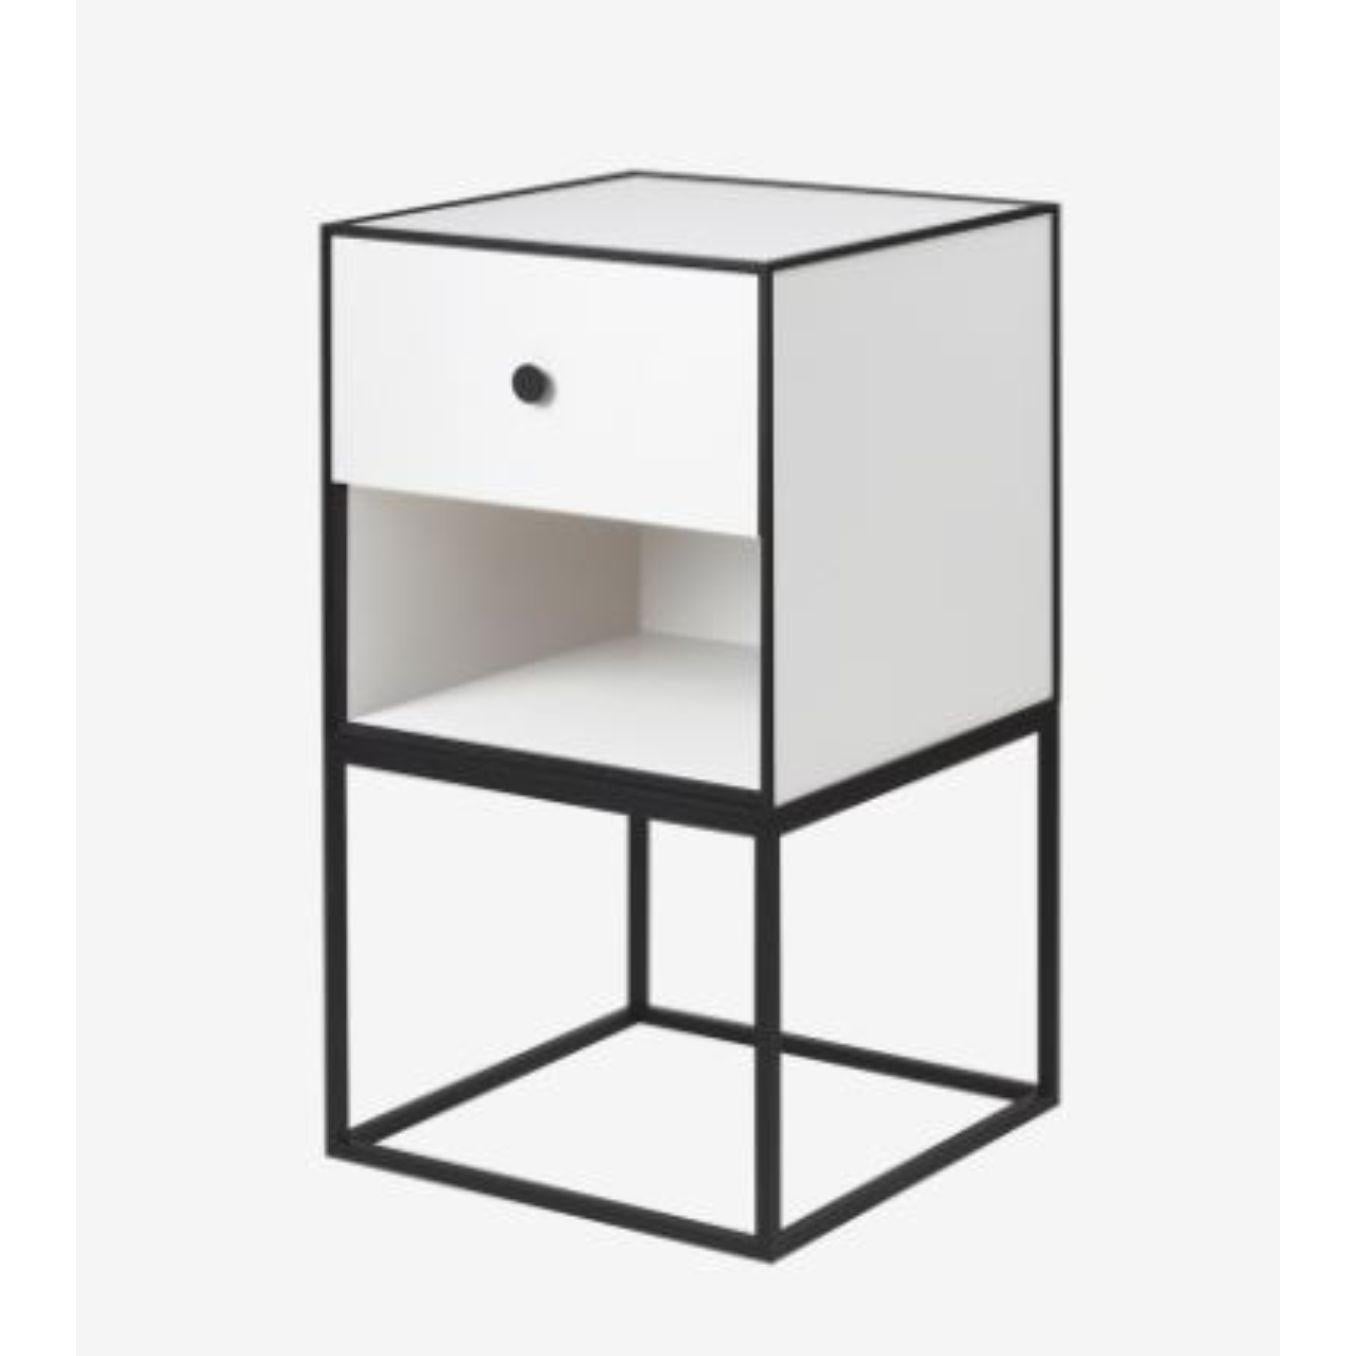 35 white frame sideboard with 1 drawer by Lassen
Dimensions: W 35 x D 35 x H 63 cm 
Materials: Finér, Melamin, Melamine, Metal, Veneer,
Also available in different colors and dimensions. 
Weight: 15.50 Kg

By Lassen is a Danish design brand